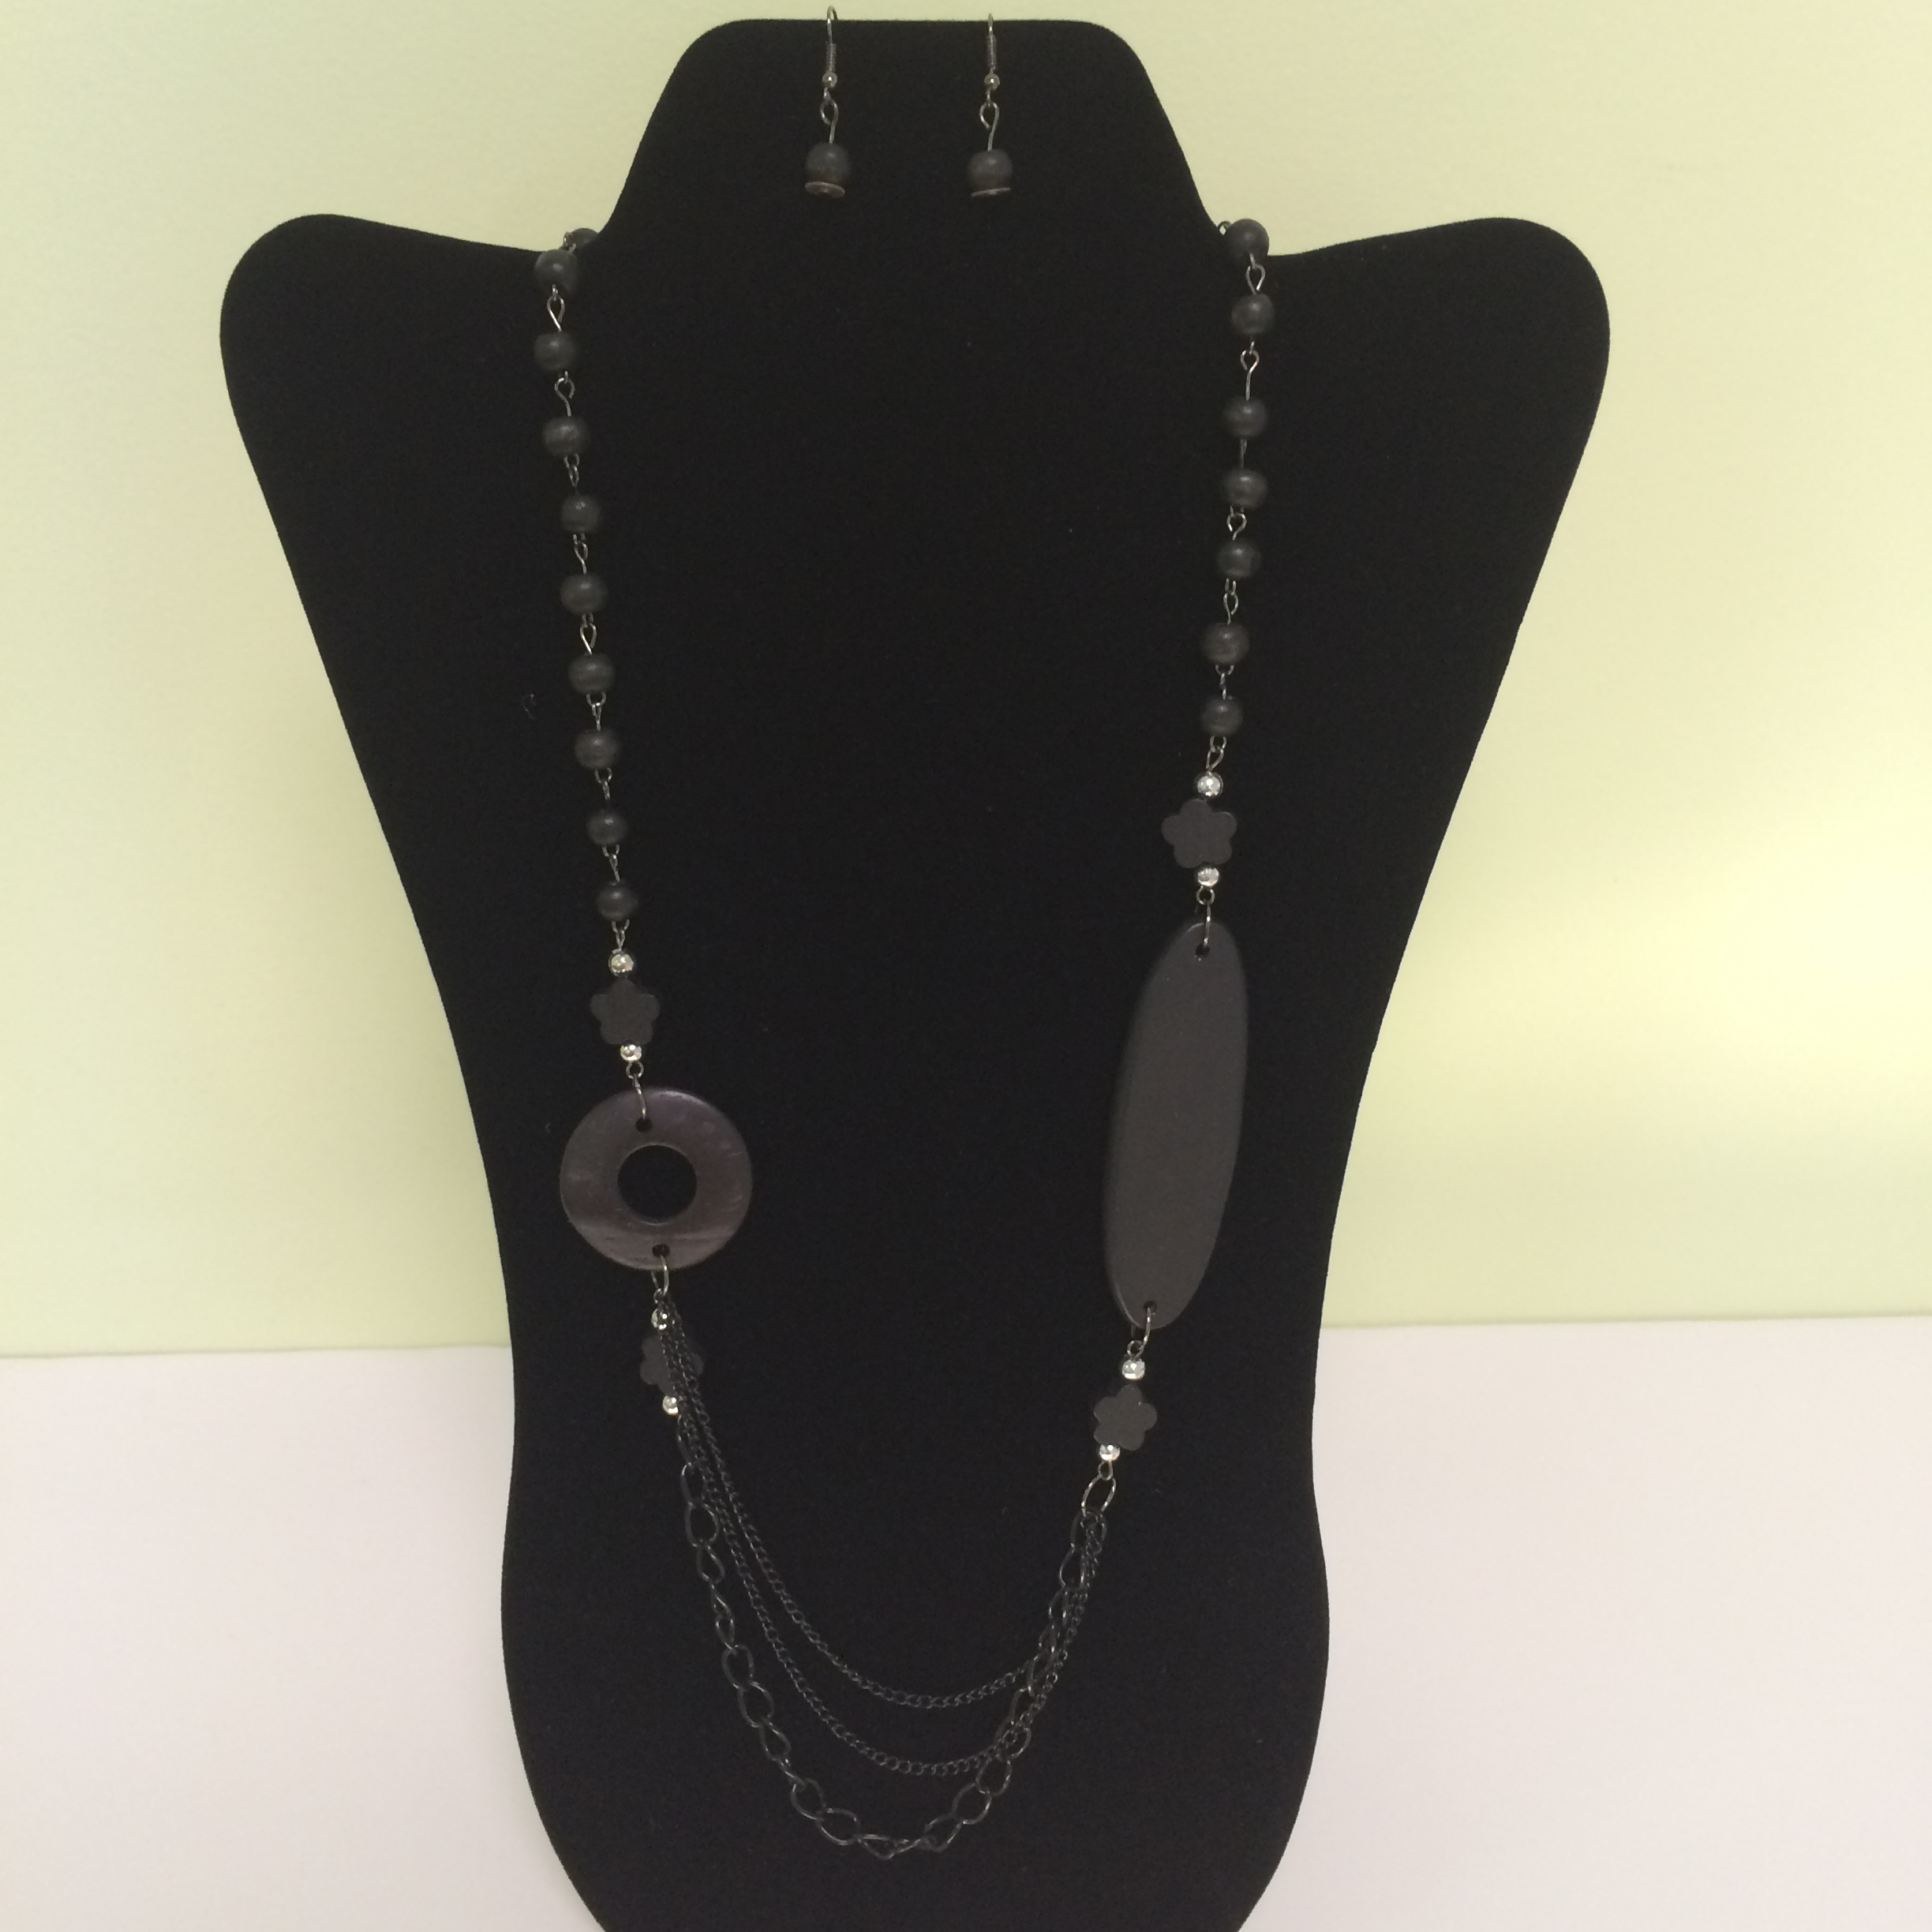 Charcoal Colored Beads Fashion Necklace & Earring Set